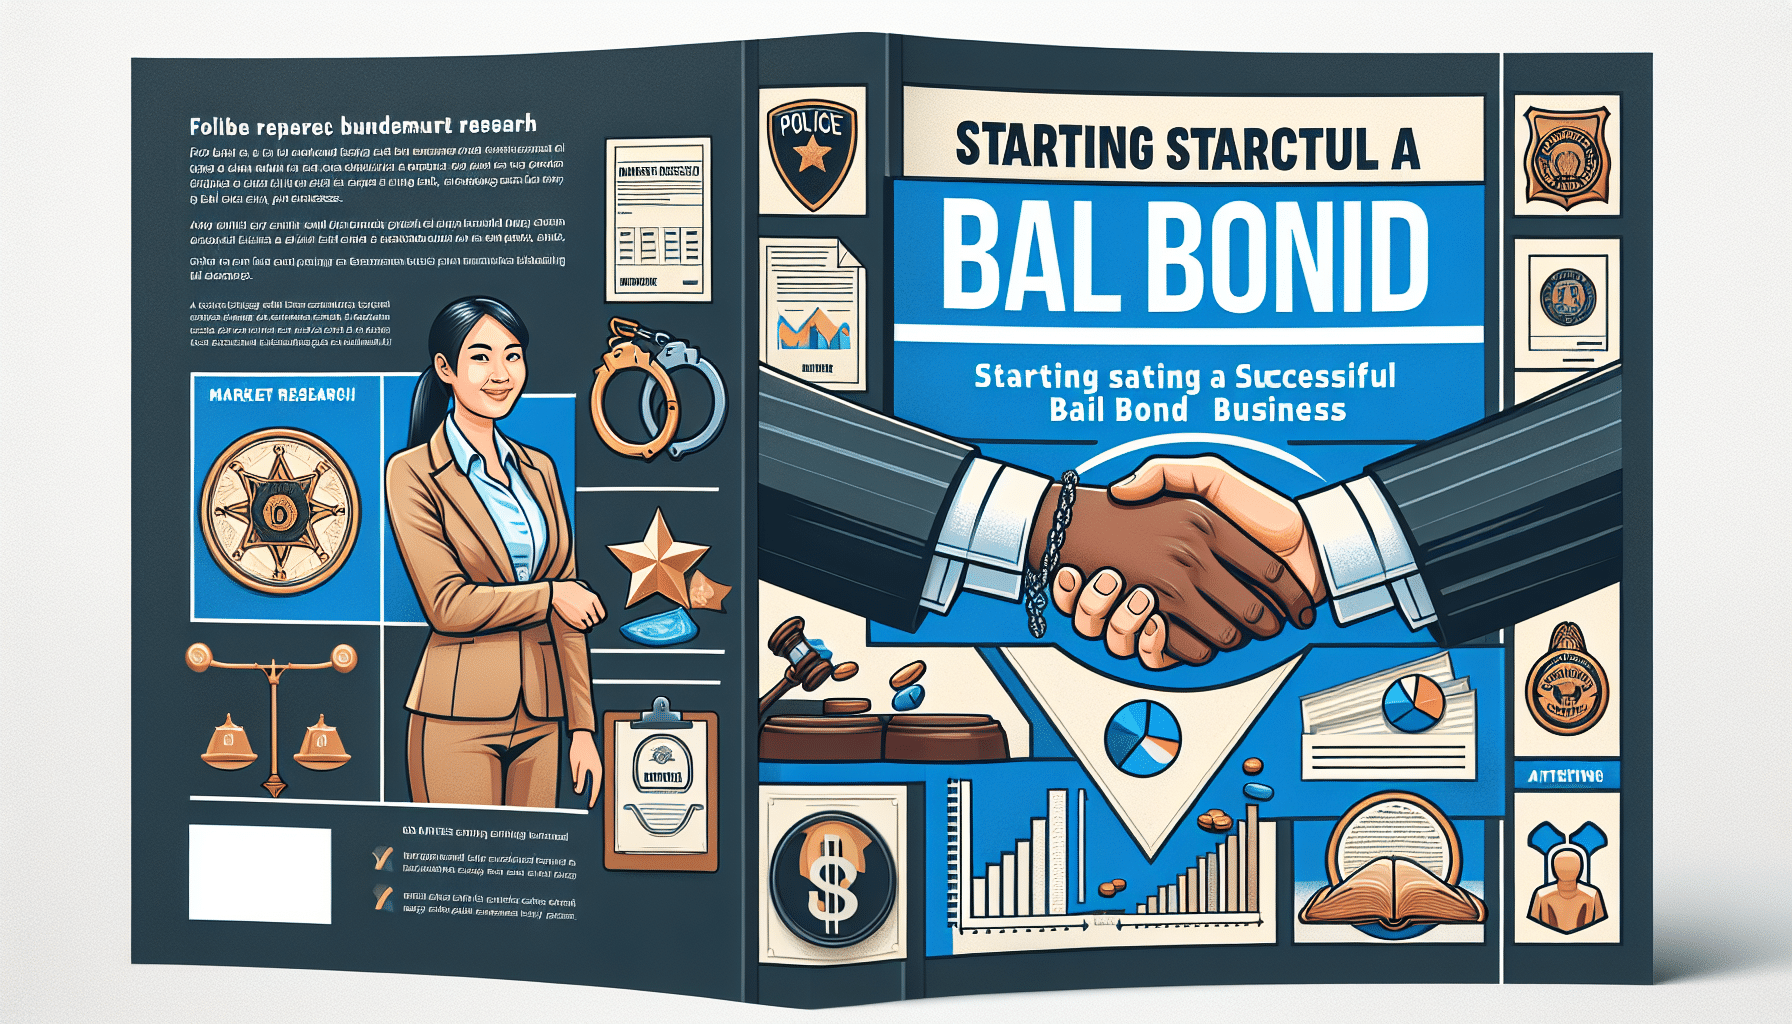 Tips for Starting a Successful Bail Bond Business